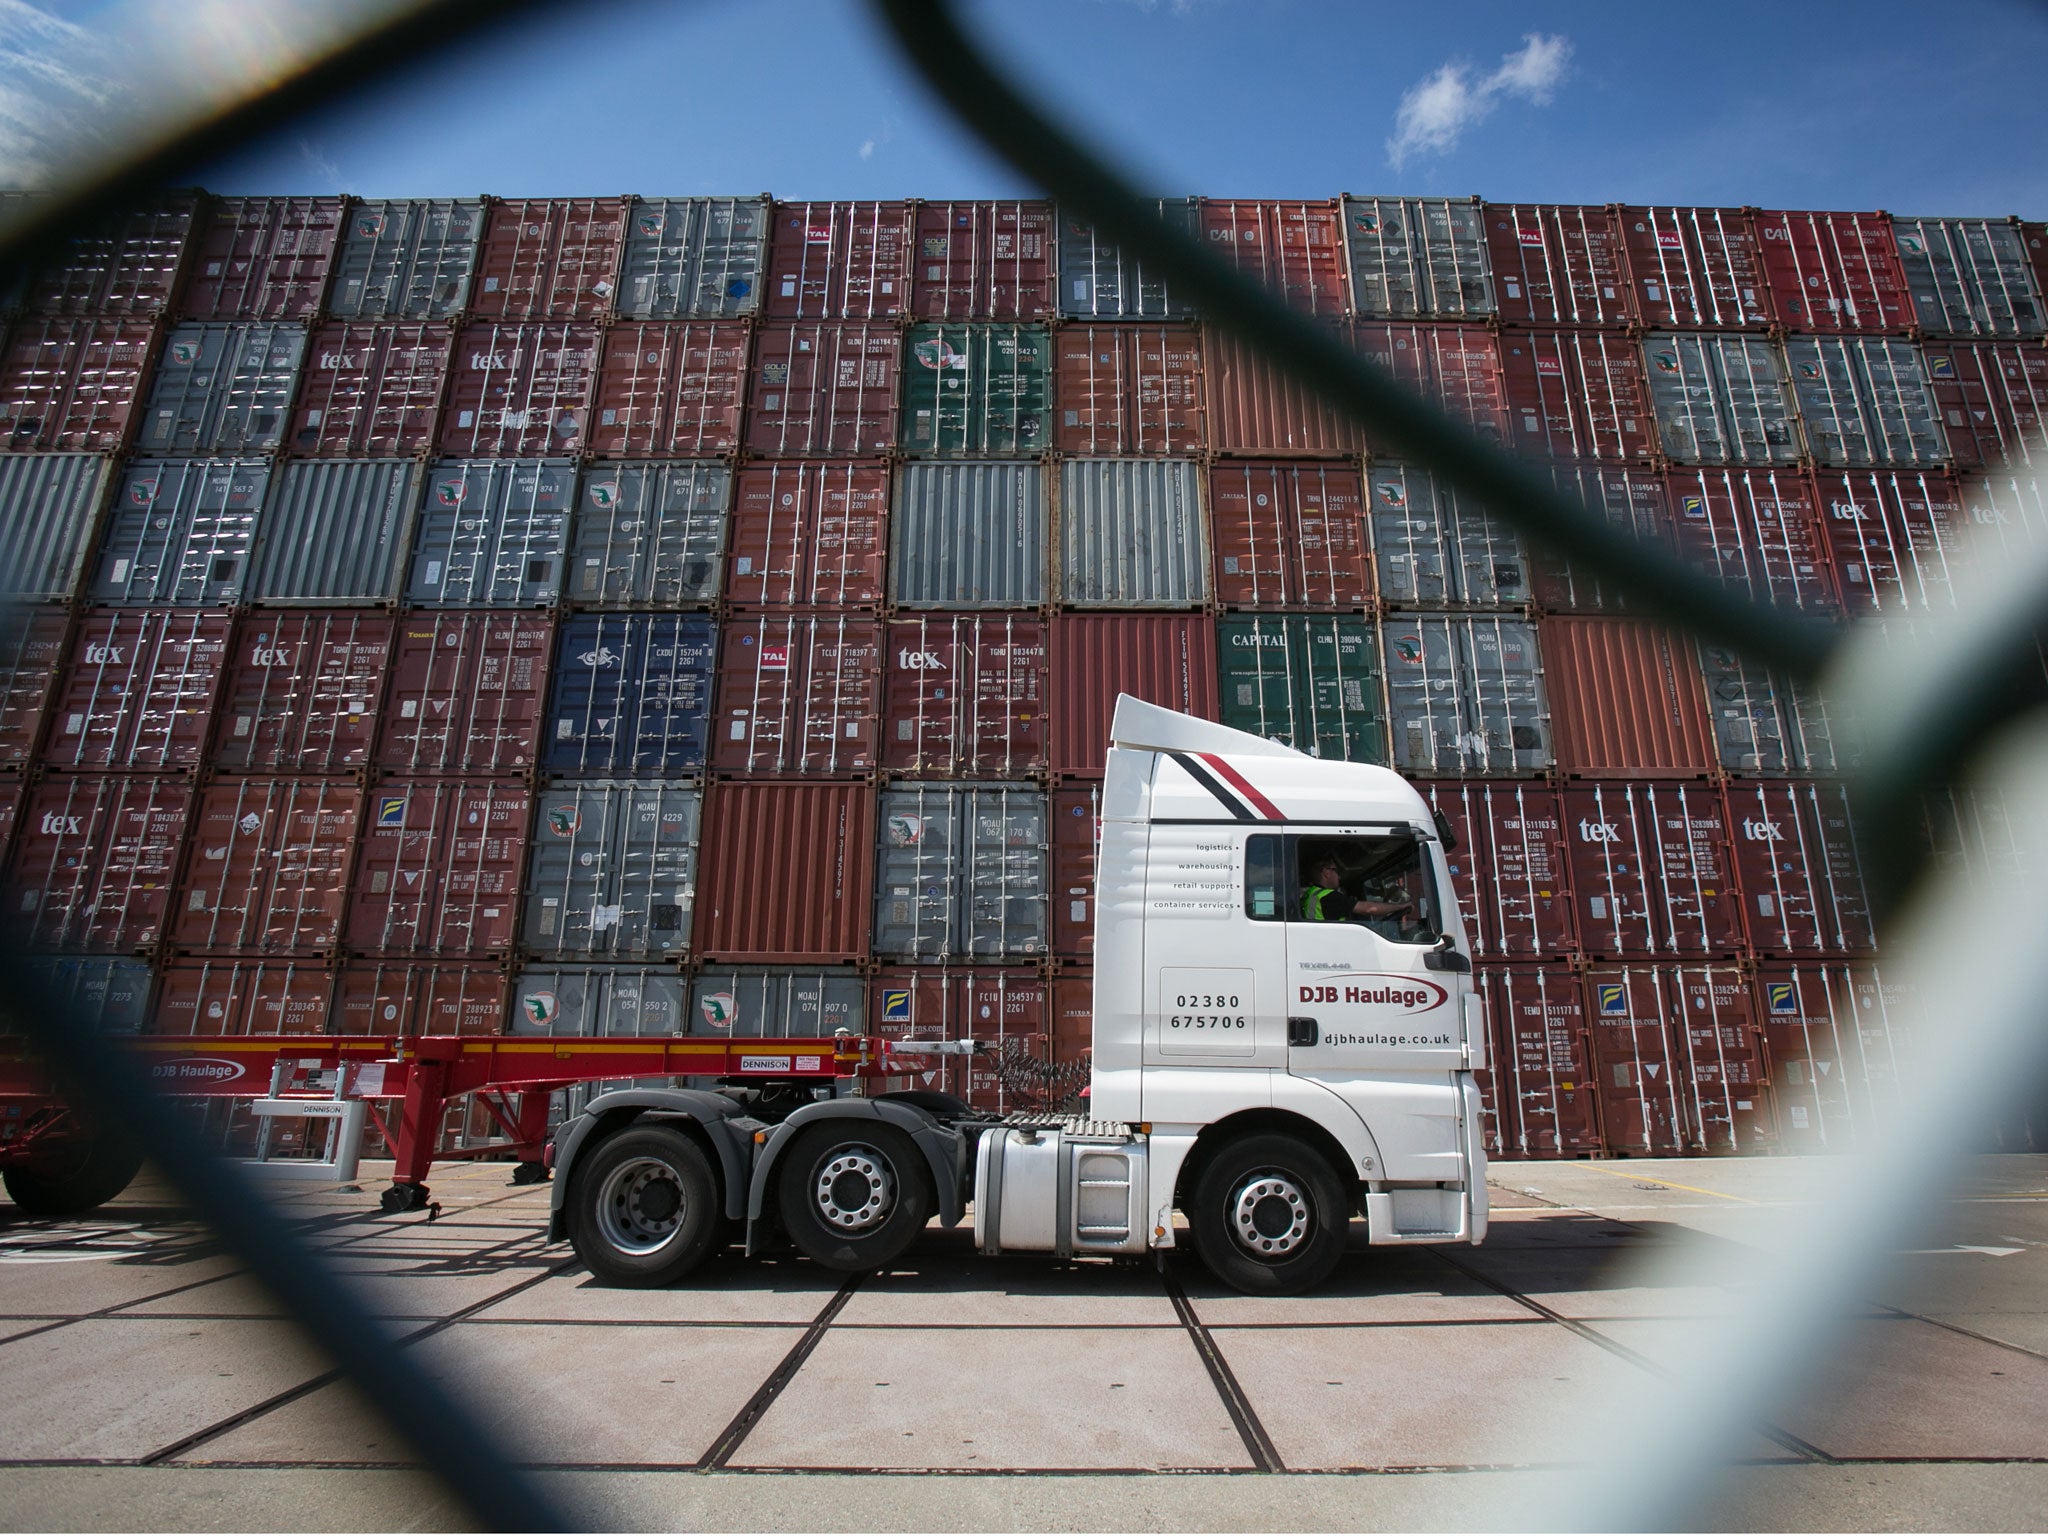 Exports jumped by 1.4 per cent in the final quarter of 2014